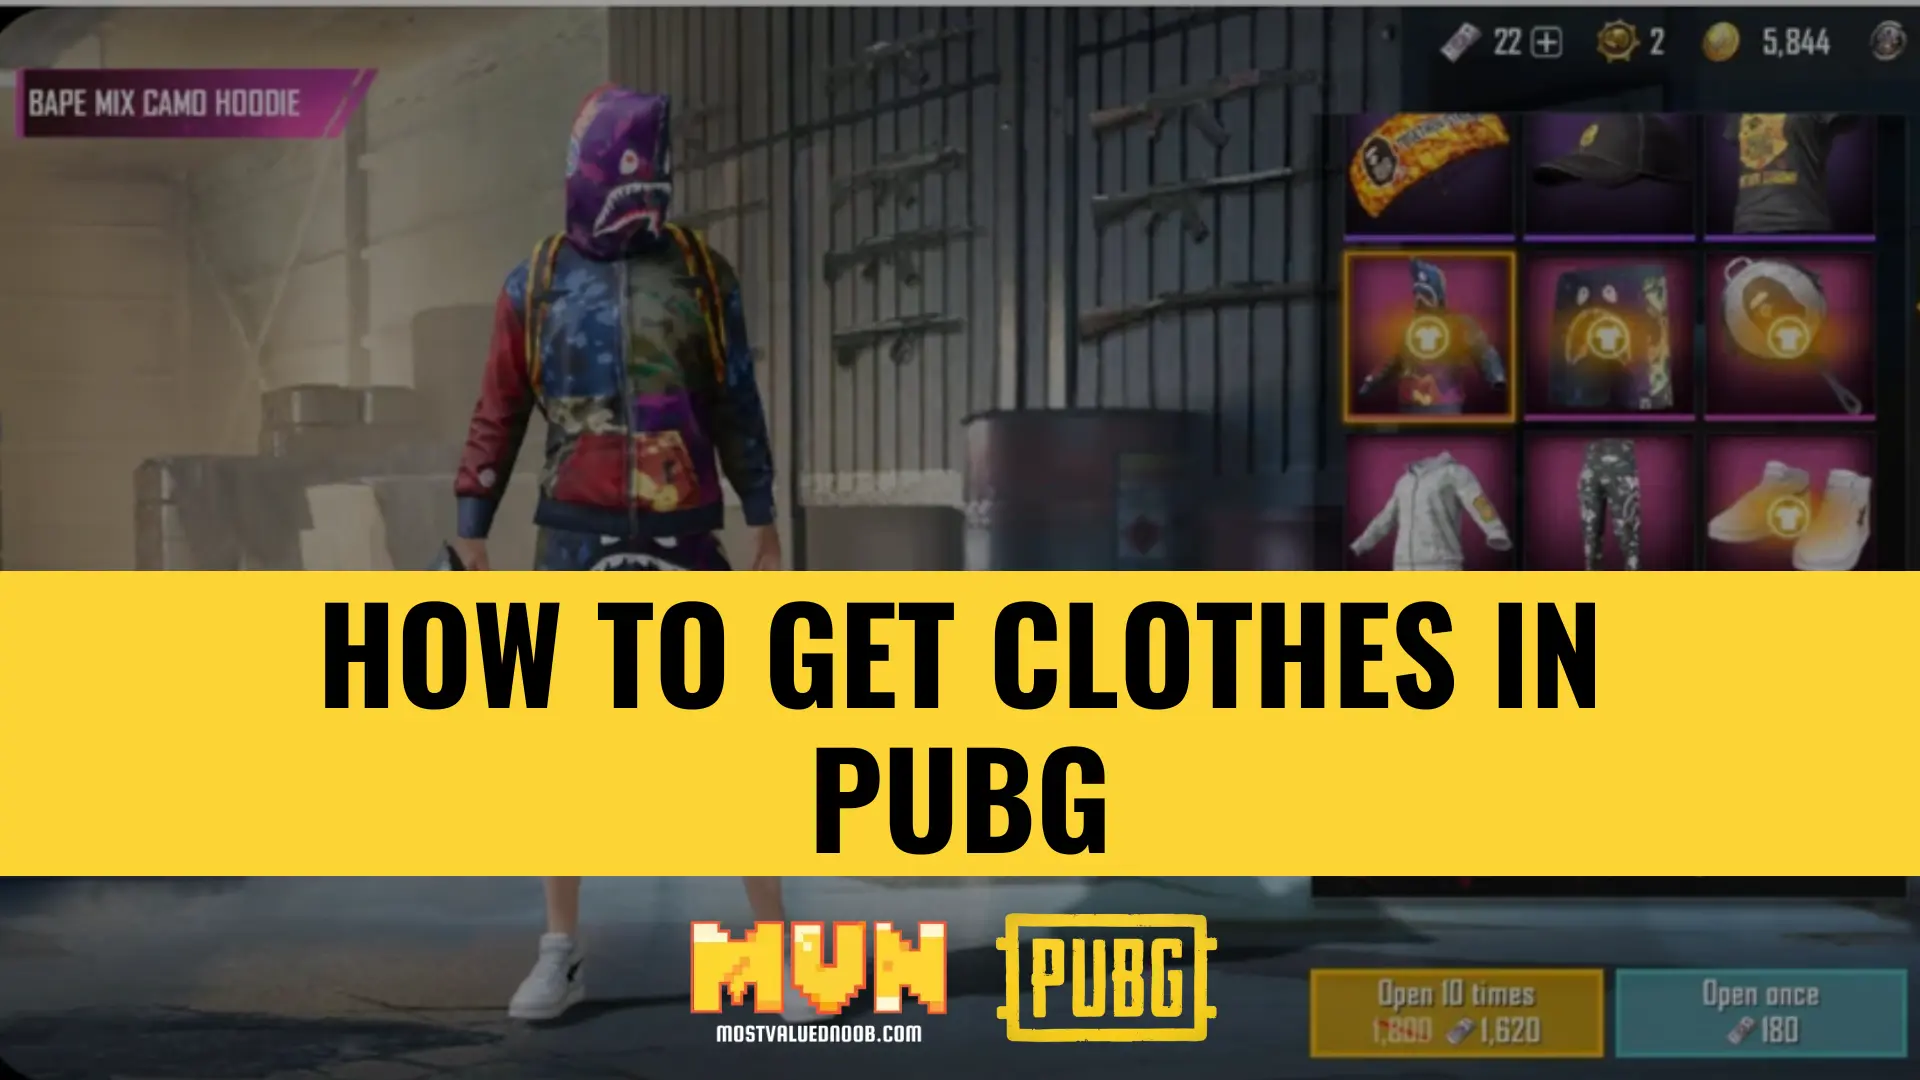 How to Get Clothes in PUBG